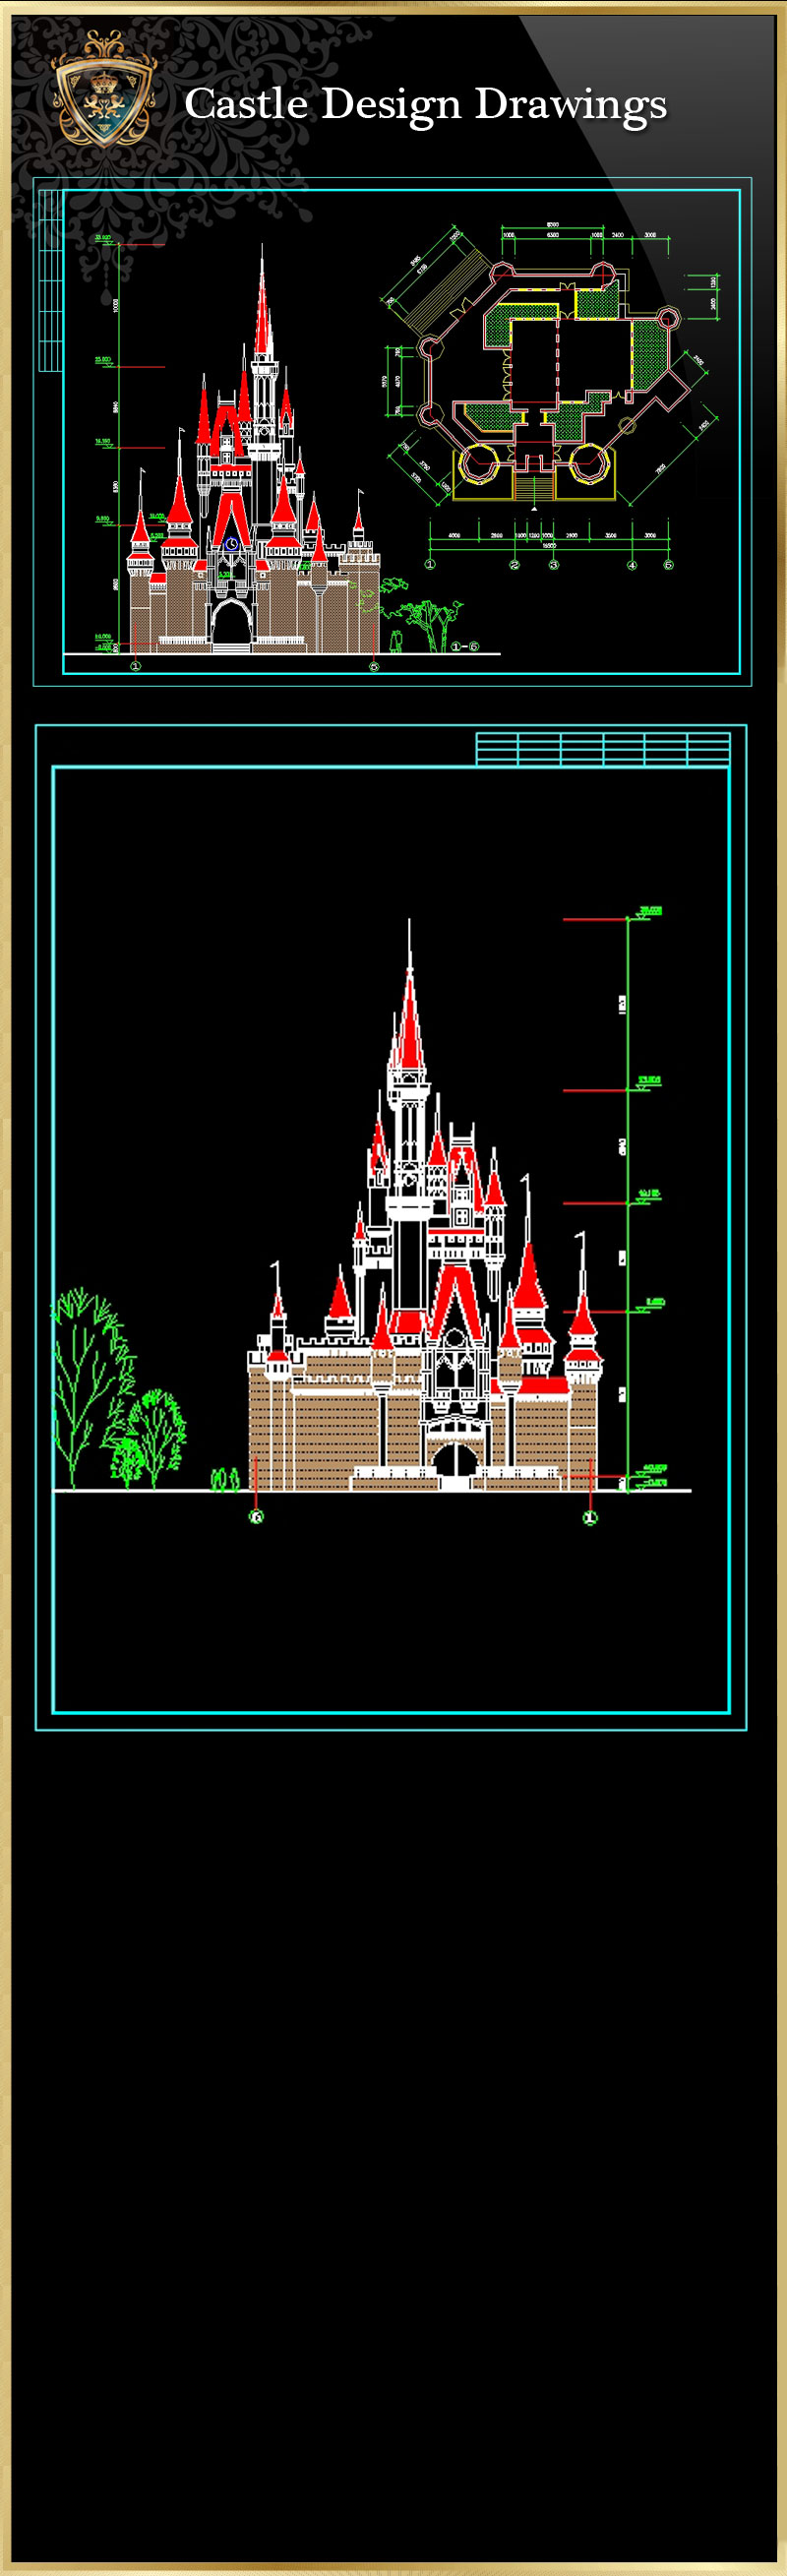 ★【Castle Design 2】Download Luxury Architectural Design CAD Drawings--Over 20000+ High quality CAD Blocks and Drawings Download!